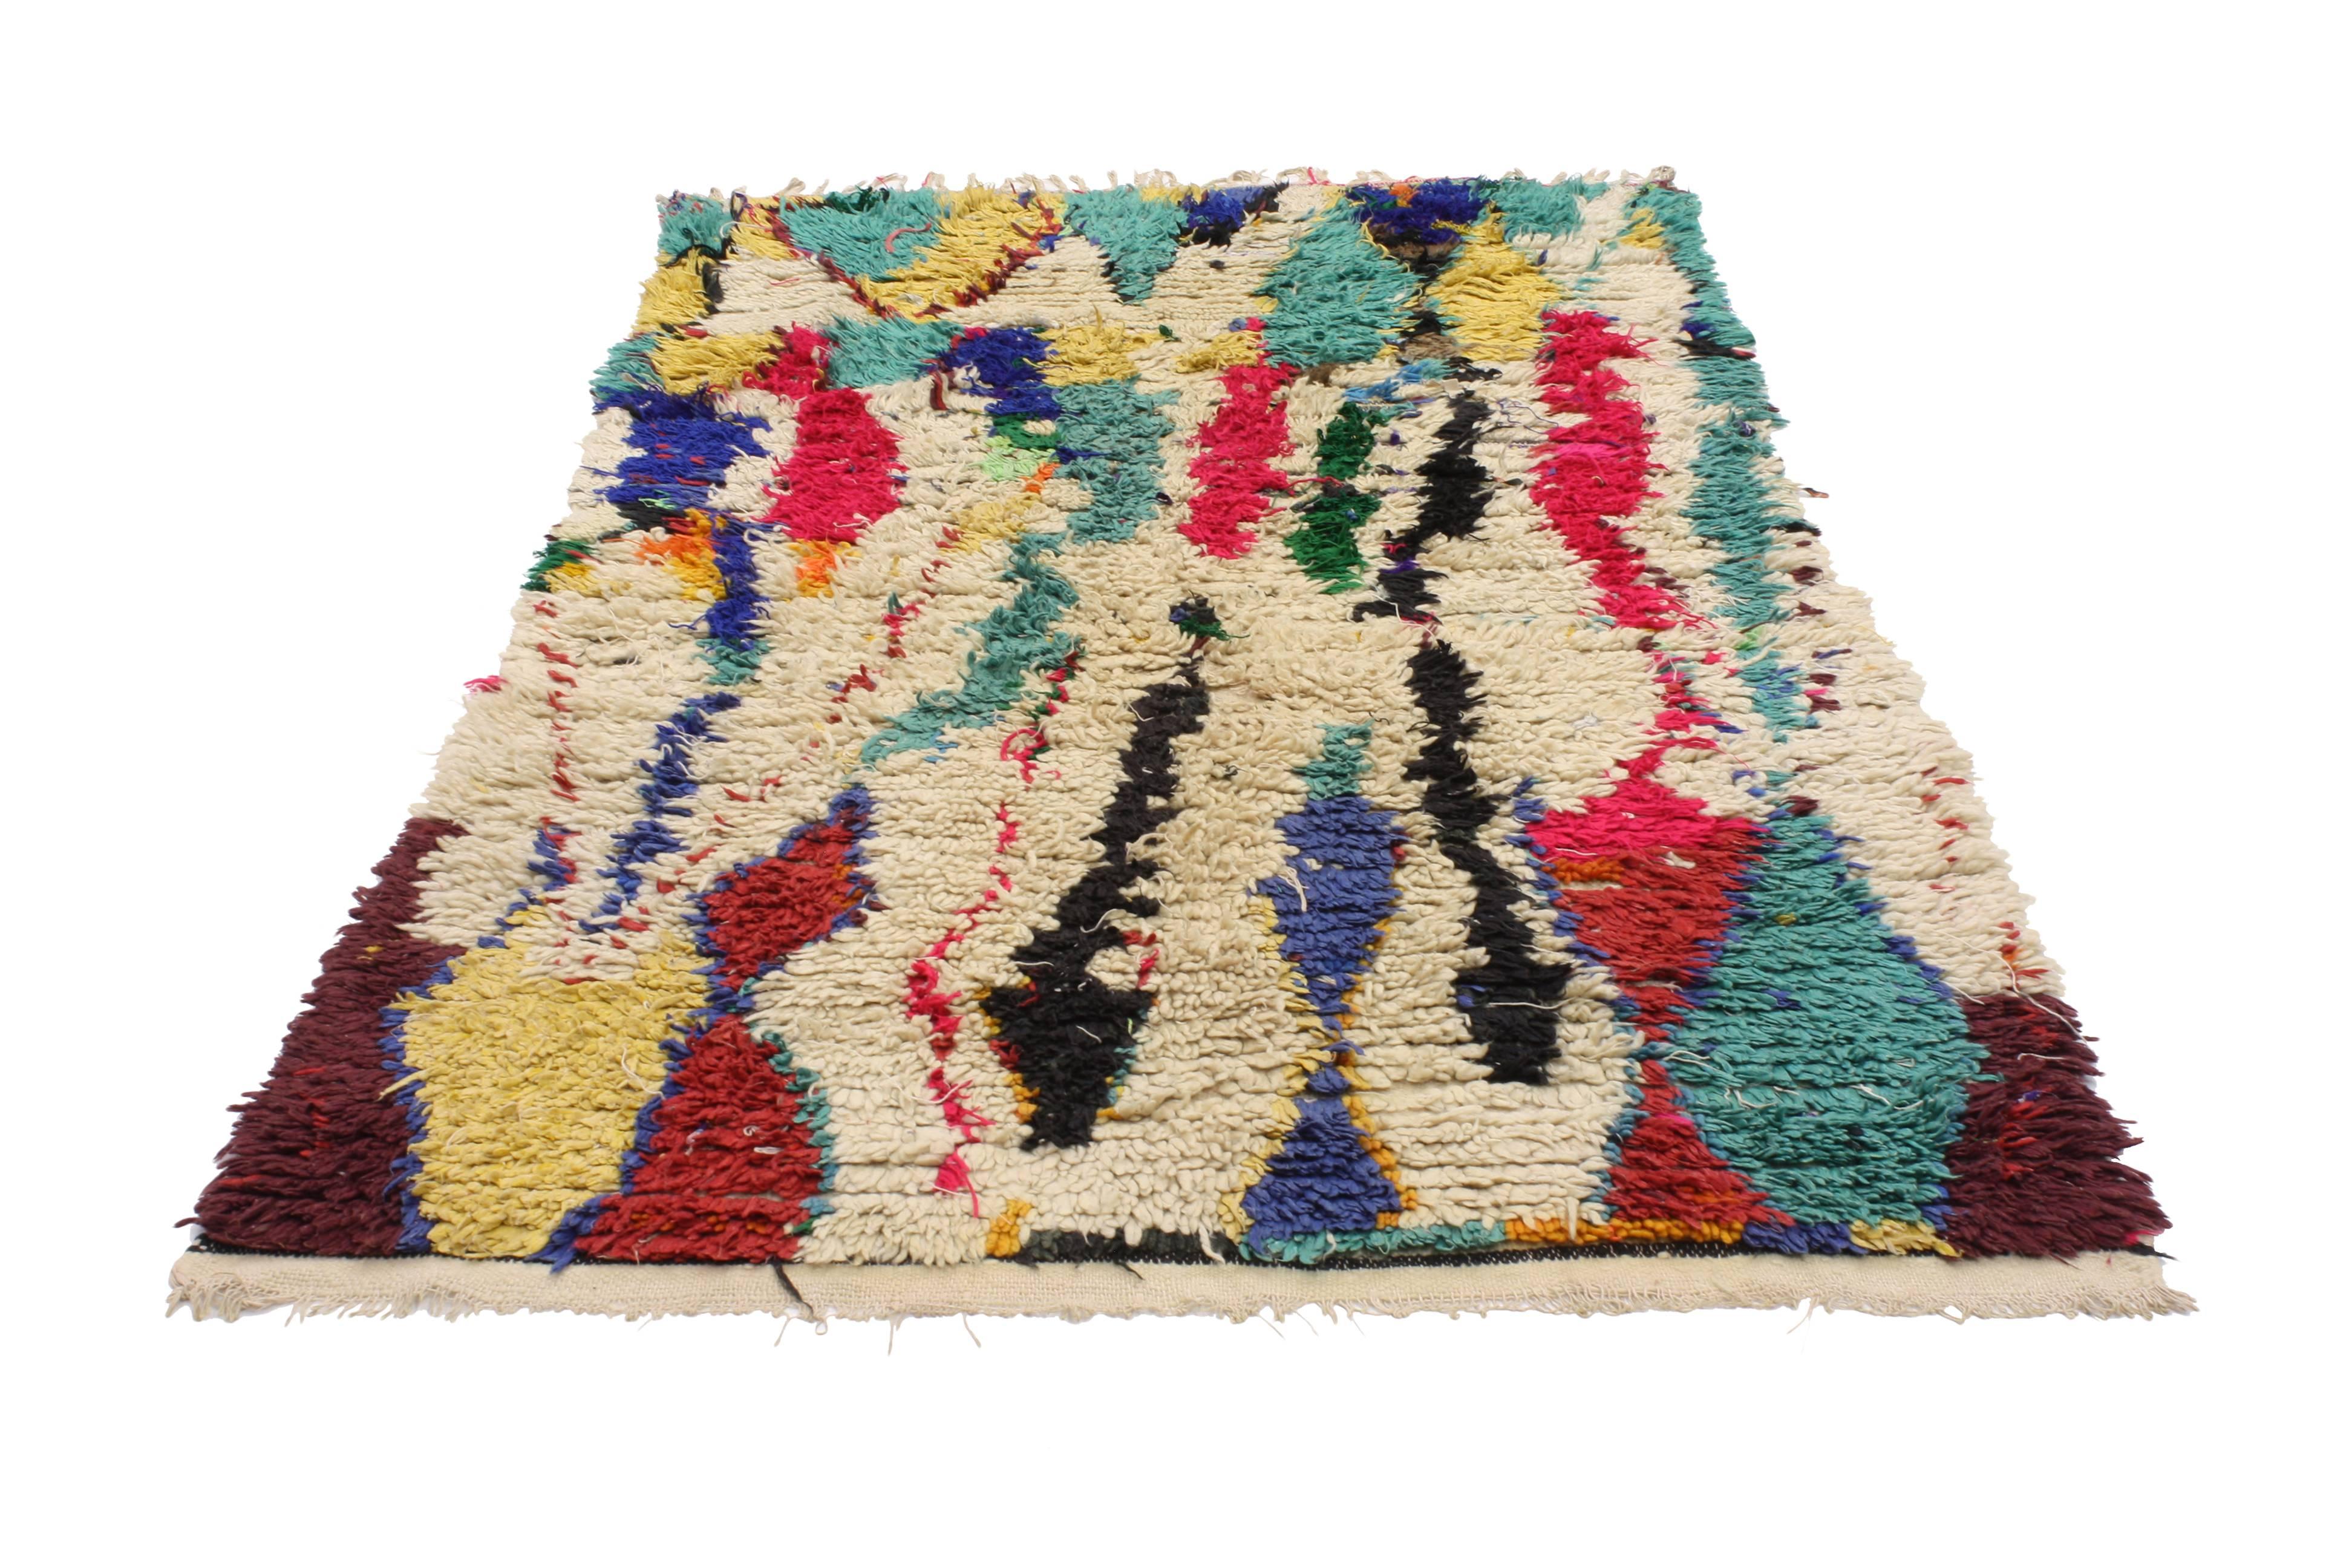 20454, vintage Berber Moroccan Azilal rug with abstract expressionist style. This hand knotted wool vintage Moroccan Azilal rug features a bold poly-chromatic contemporary abstract design. Rendered in a kaleidoscope of colors ranging from oxblood